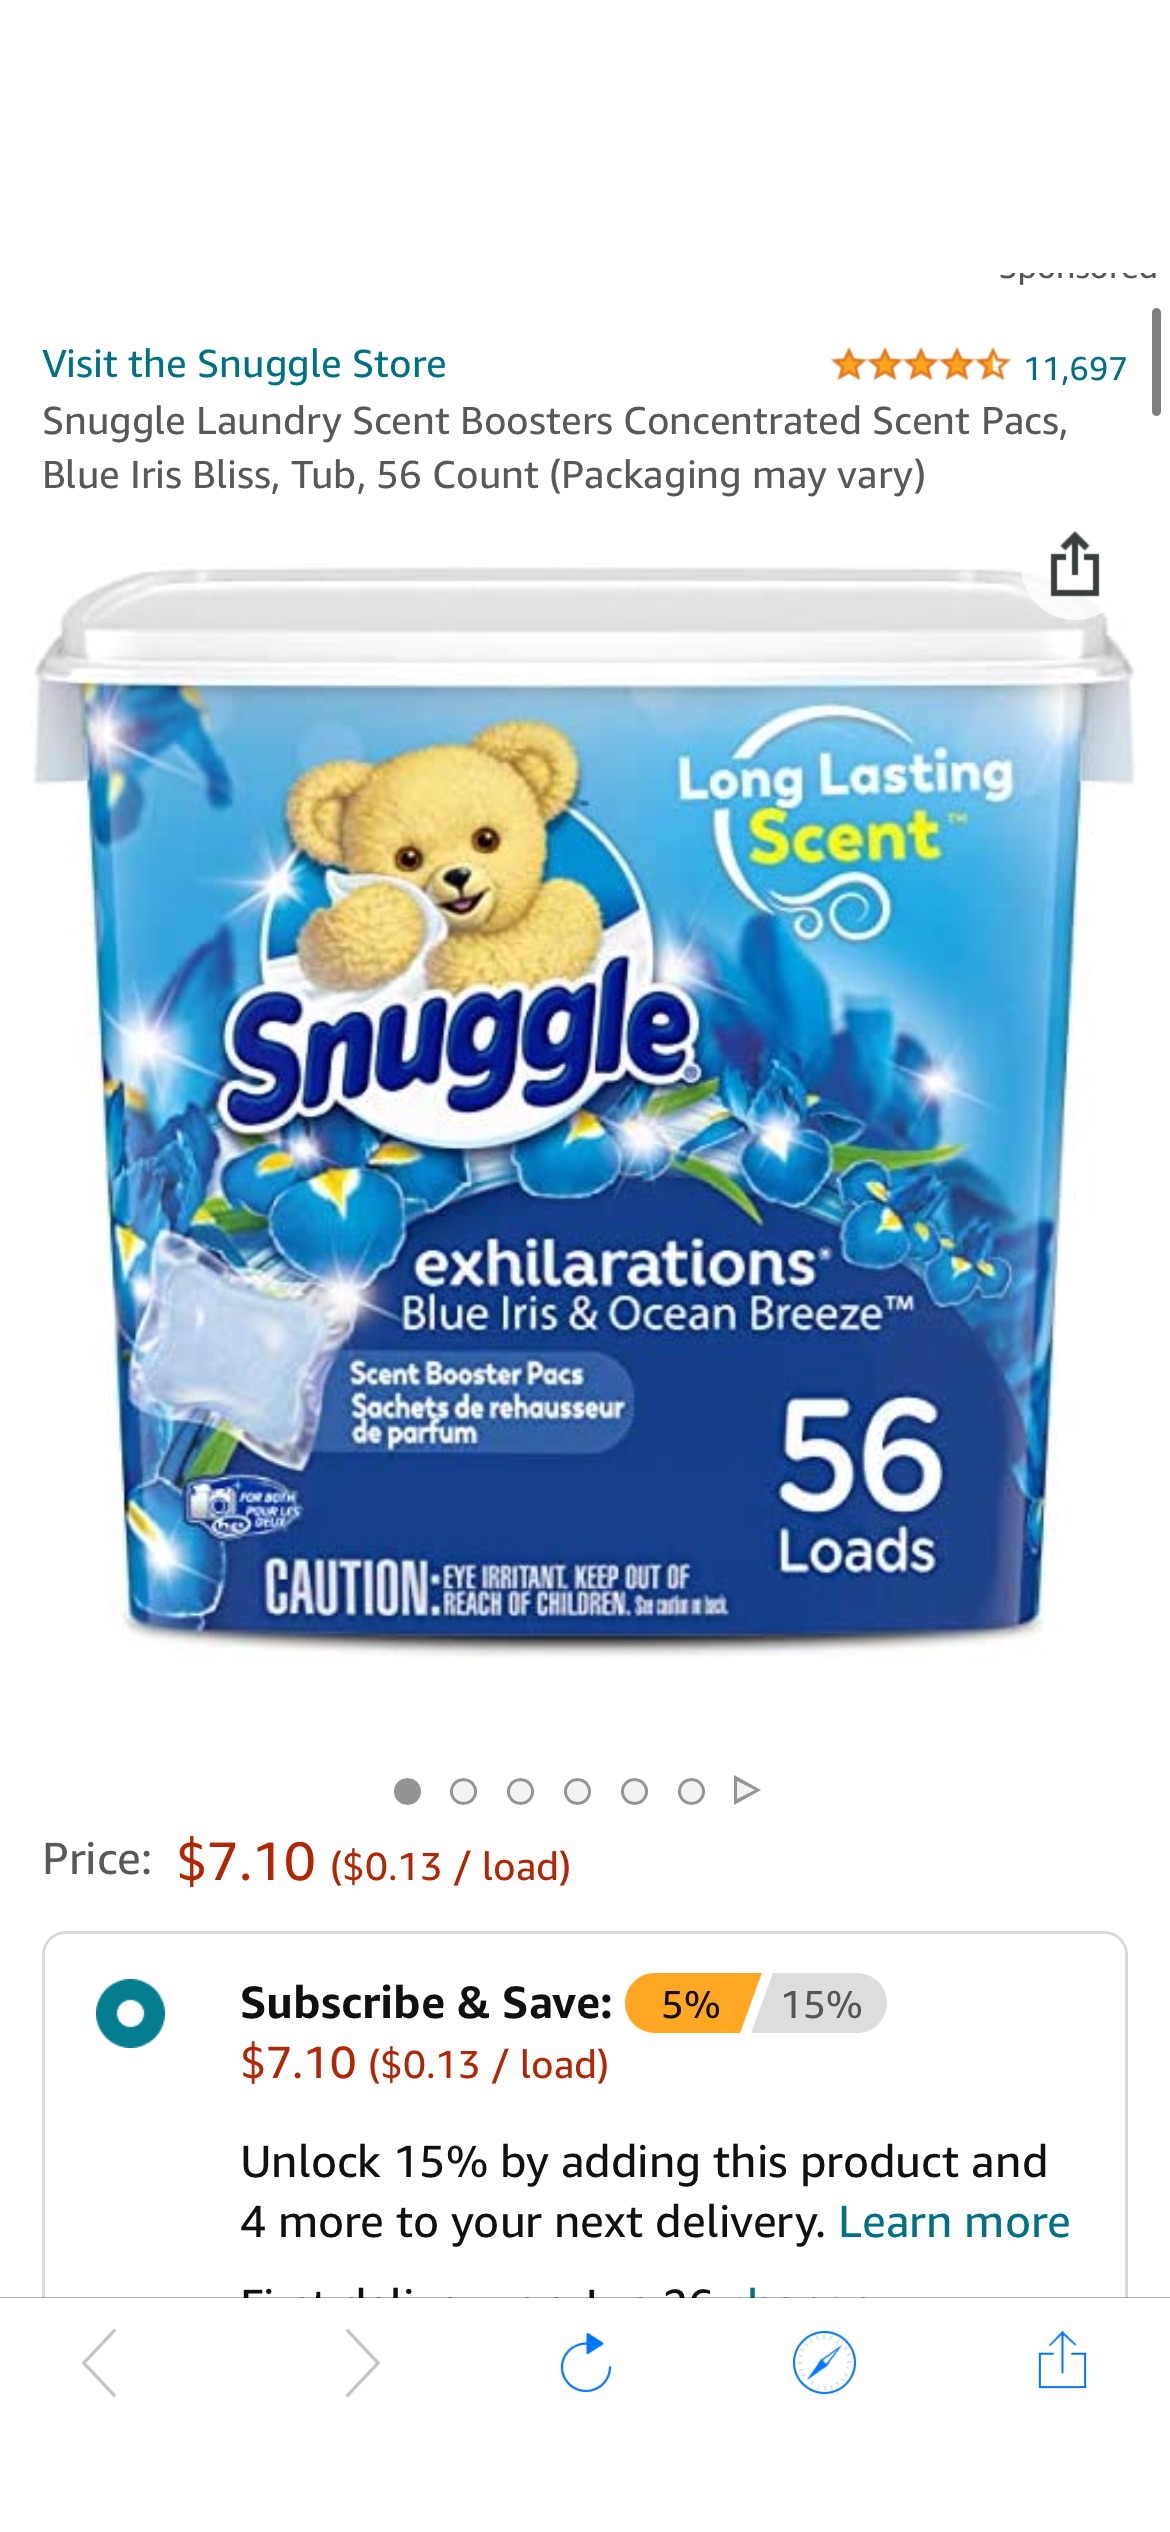 Amazon.com: Snuggle Laundry Scent Boosters Concentrated Scent Pacs, Blue Iris Bliss, Tub, 56 Count (Packaging may vary) : Health & Household 洗衣香珠S&S